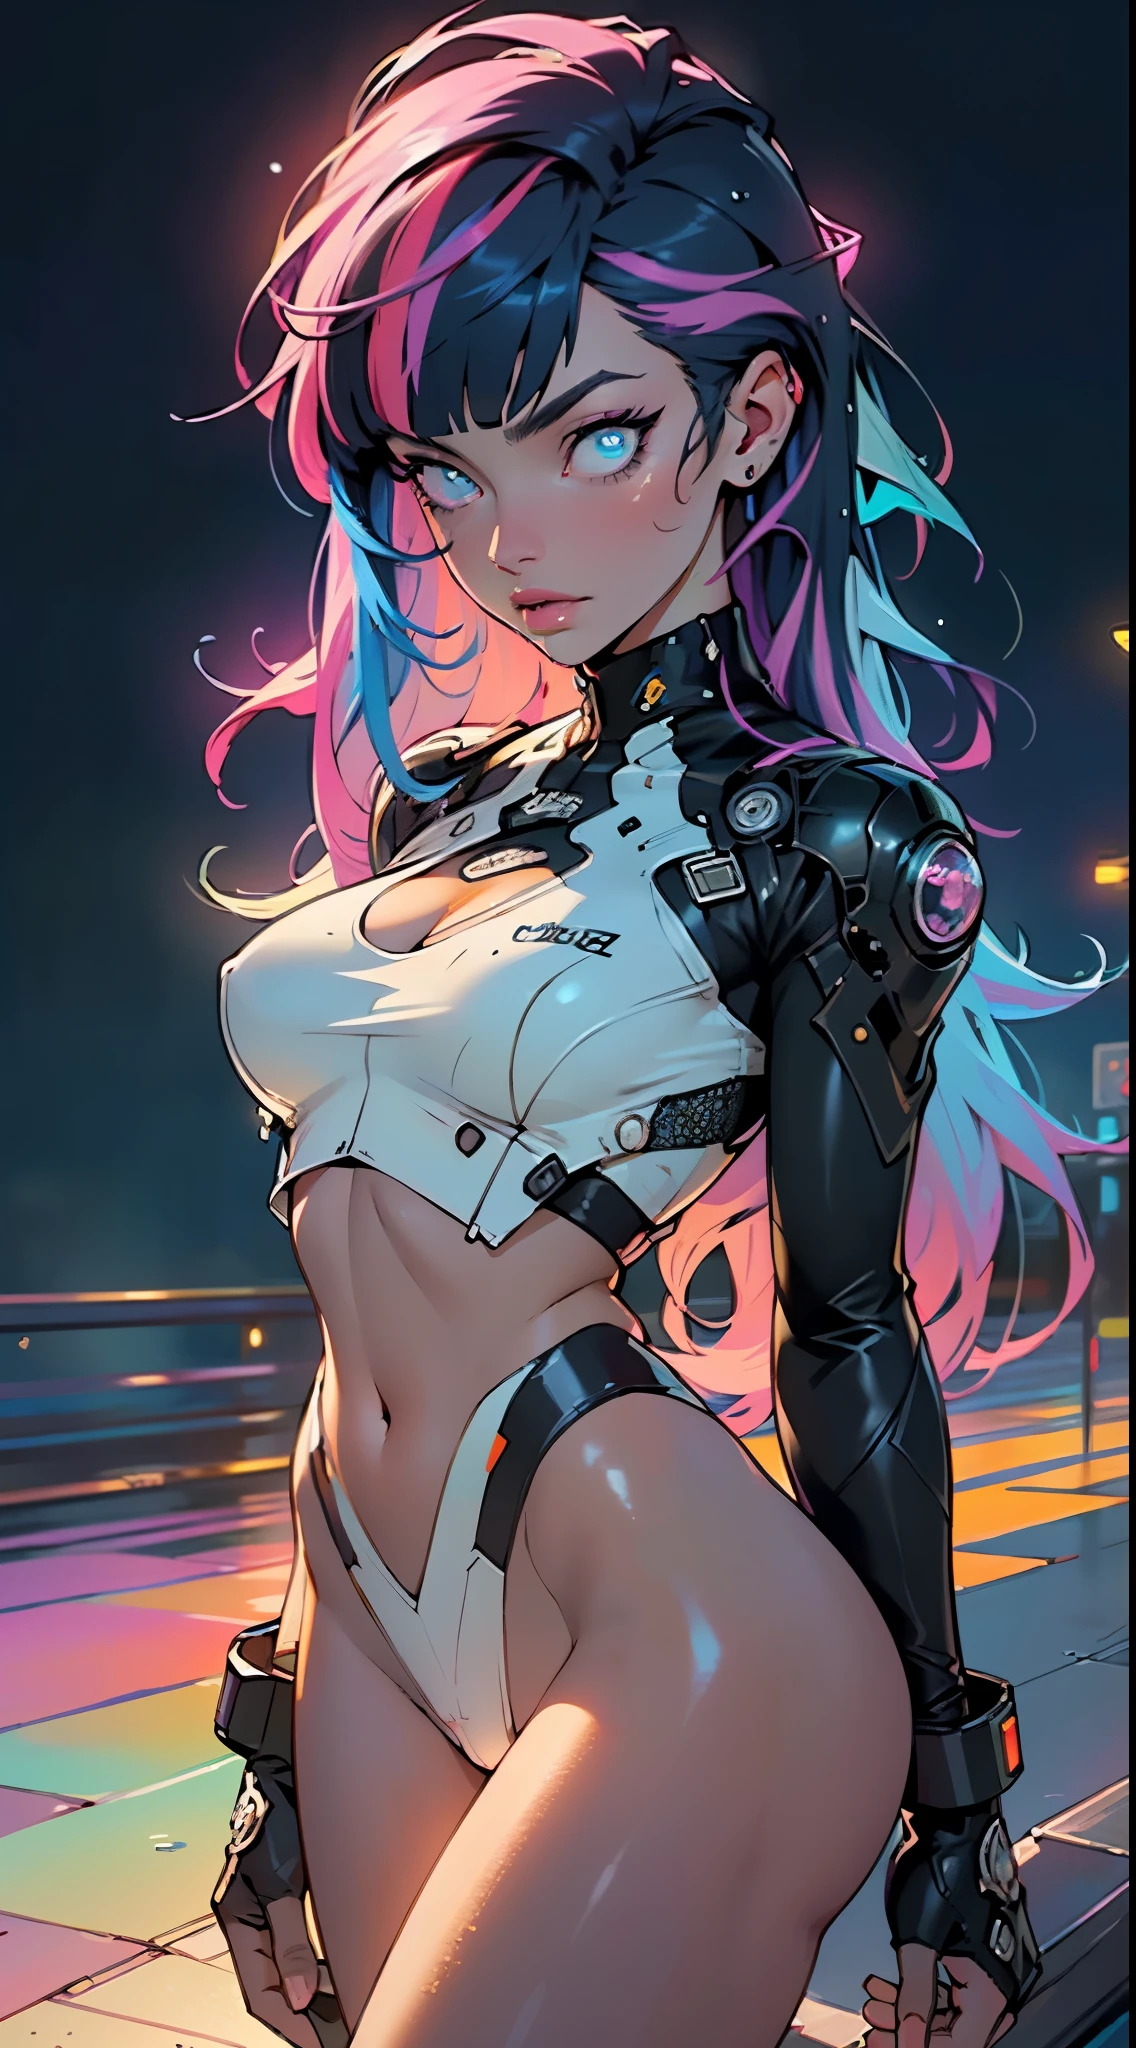 cyberpunk girl,(((1girl))),((cute and beautiful rainbow haired girl)),

(Colorful hair:1.5), (all the colors of the rainbow:1.5),crystal clear eyes,rainbow color gradient bangs:1.5,(rainbow colored hair:1.5), color splash, color explosion, (colorful), Face Paint, ((streaked hair)),(Gradient color eyes),(((colorful eyes))),

(large breasts:1.4),saggy breasts,mane,((multicolored_hair:1.3)), ((rainbow hair:1.3)),((hair bangs:1.3)),((hair with the seven colors of the rainbow:1.3)),((straight hair:1.3)),((very straight hair,very_long hair:1.5)),((The beauty of extra-long hair)),((Super Long Straight Hair)),((bangs)),(((neon rainbow eyes:1.3))),intricate eyes,beautiful detailed eyes,symmetrical eyes,((fat)),(((lustrous skin:1.5,bright skin: 1.5,skin tanned,shiny skin,very shiny skin,shiny body,plastic glitter skin,exaggerated shiny skin,illuminated skin,wet legs))),(spider lower abdomen,narrow waist,wide hip,athletic body,inflated legs, thick thighs,detailed body,(detailed face)),

cute,slutty,erotic,((nsfw)),

white pilot suit,white cyber suit,absurdres,Long legs,cleavage,(((wet clothes,intricate outfit,intricate clothes))),

(hypnotized pose:1.0),hypnotized,(centered,scale to fit dimensions,Rule of thirds),

cyberpunk city by the ocean at night, with bright neon signs and dark stormy clouds and puddles, scenery:1.25,nighttime, starry night, cosmos,Very dark night that makes the neon lights stand out, very bright neon lights,nighttime, starry night, cosmos,

artistic photography,(photography taken by sldr),highres, sharp focus,(ultra detailed, extremely detailed), (photorealistic artwork:1.37),(extremely detailed CG unity 8k wallpaper),((synthwave background theme)),(((vibrant colors))),intricate,(intricate background),(masterpiece),(best quality),perfect rendered face,perfect face details,realistic face,photo realistic,analog style,((intricate detail)),(((realism))),